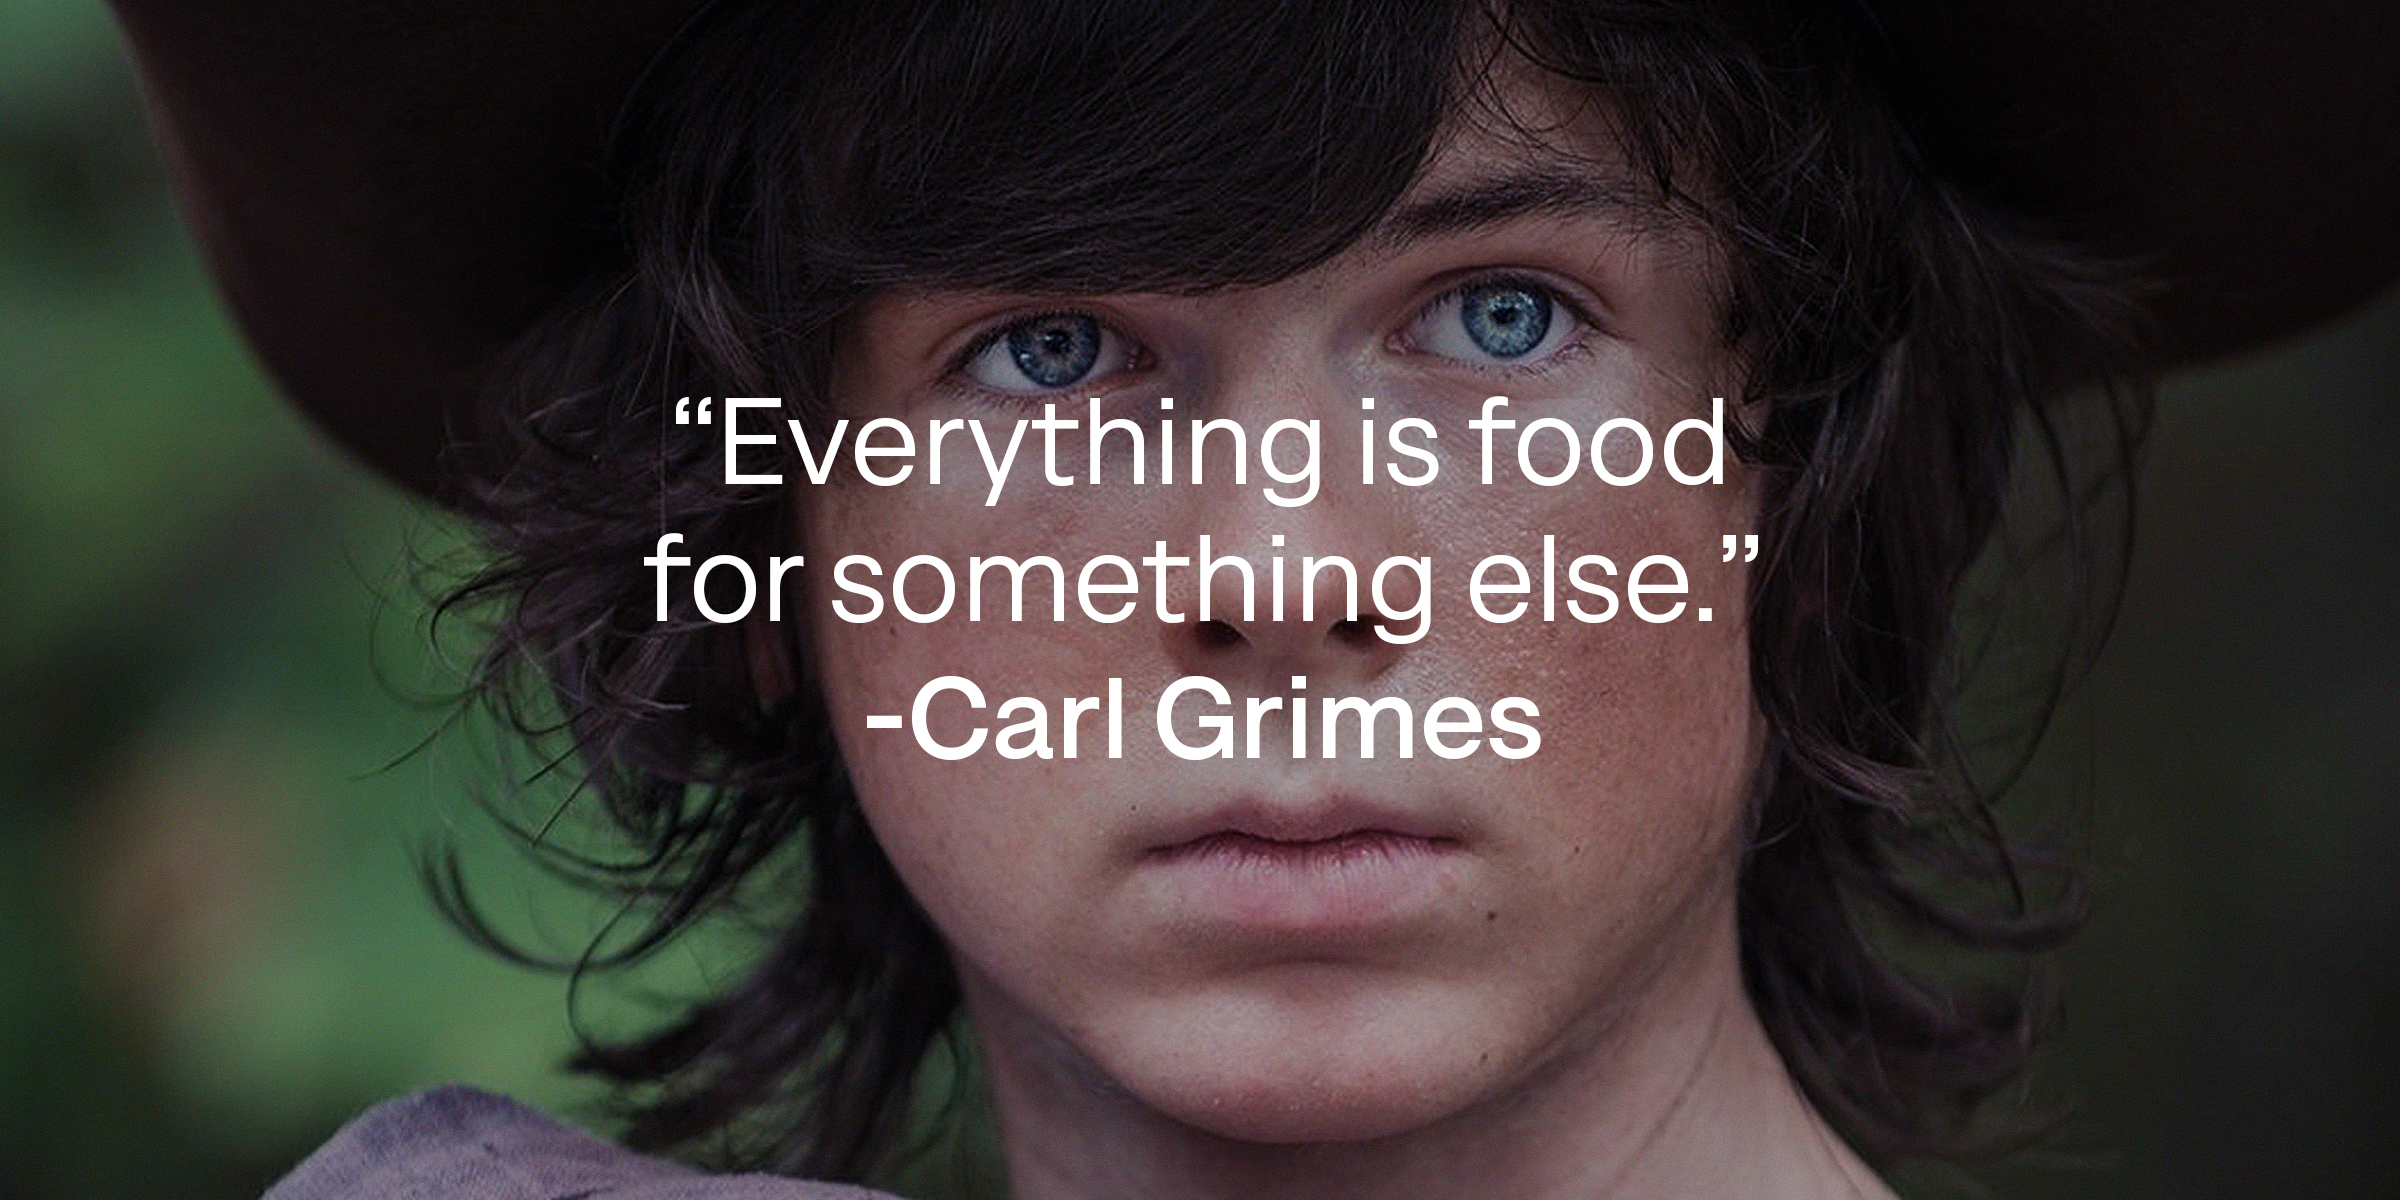 Carl Grimes, with his quote: “Everything is food for something else.” | Source: facebook.com/TheWalkingDeadAMC